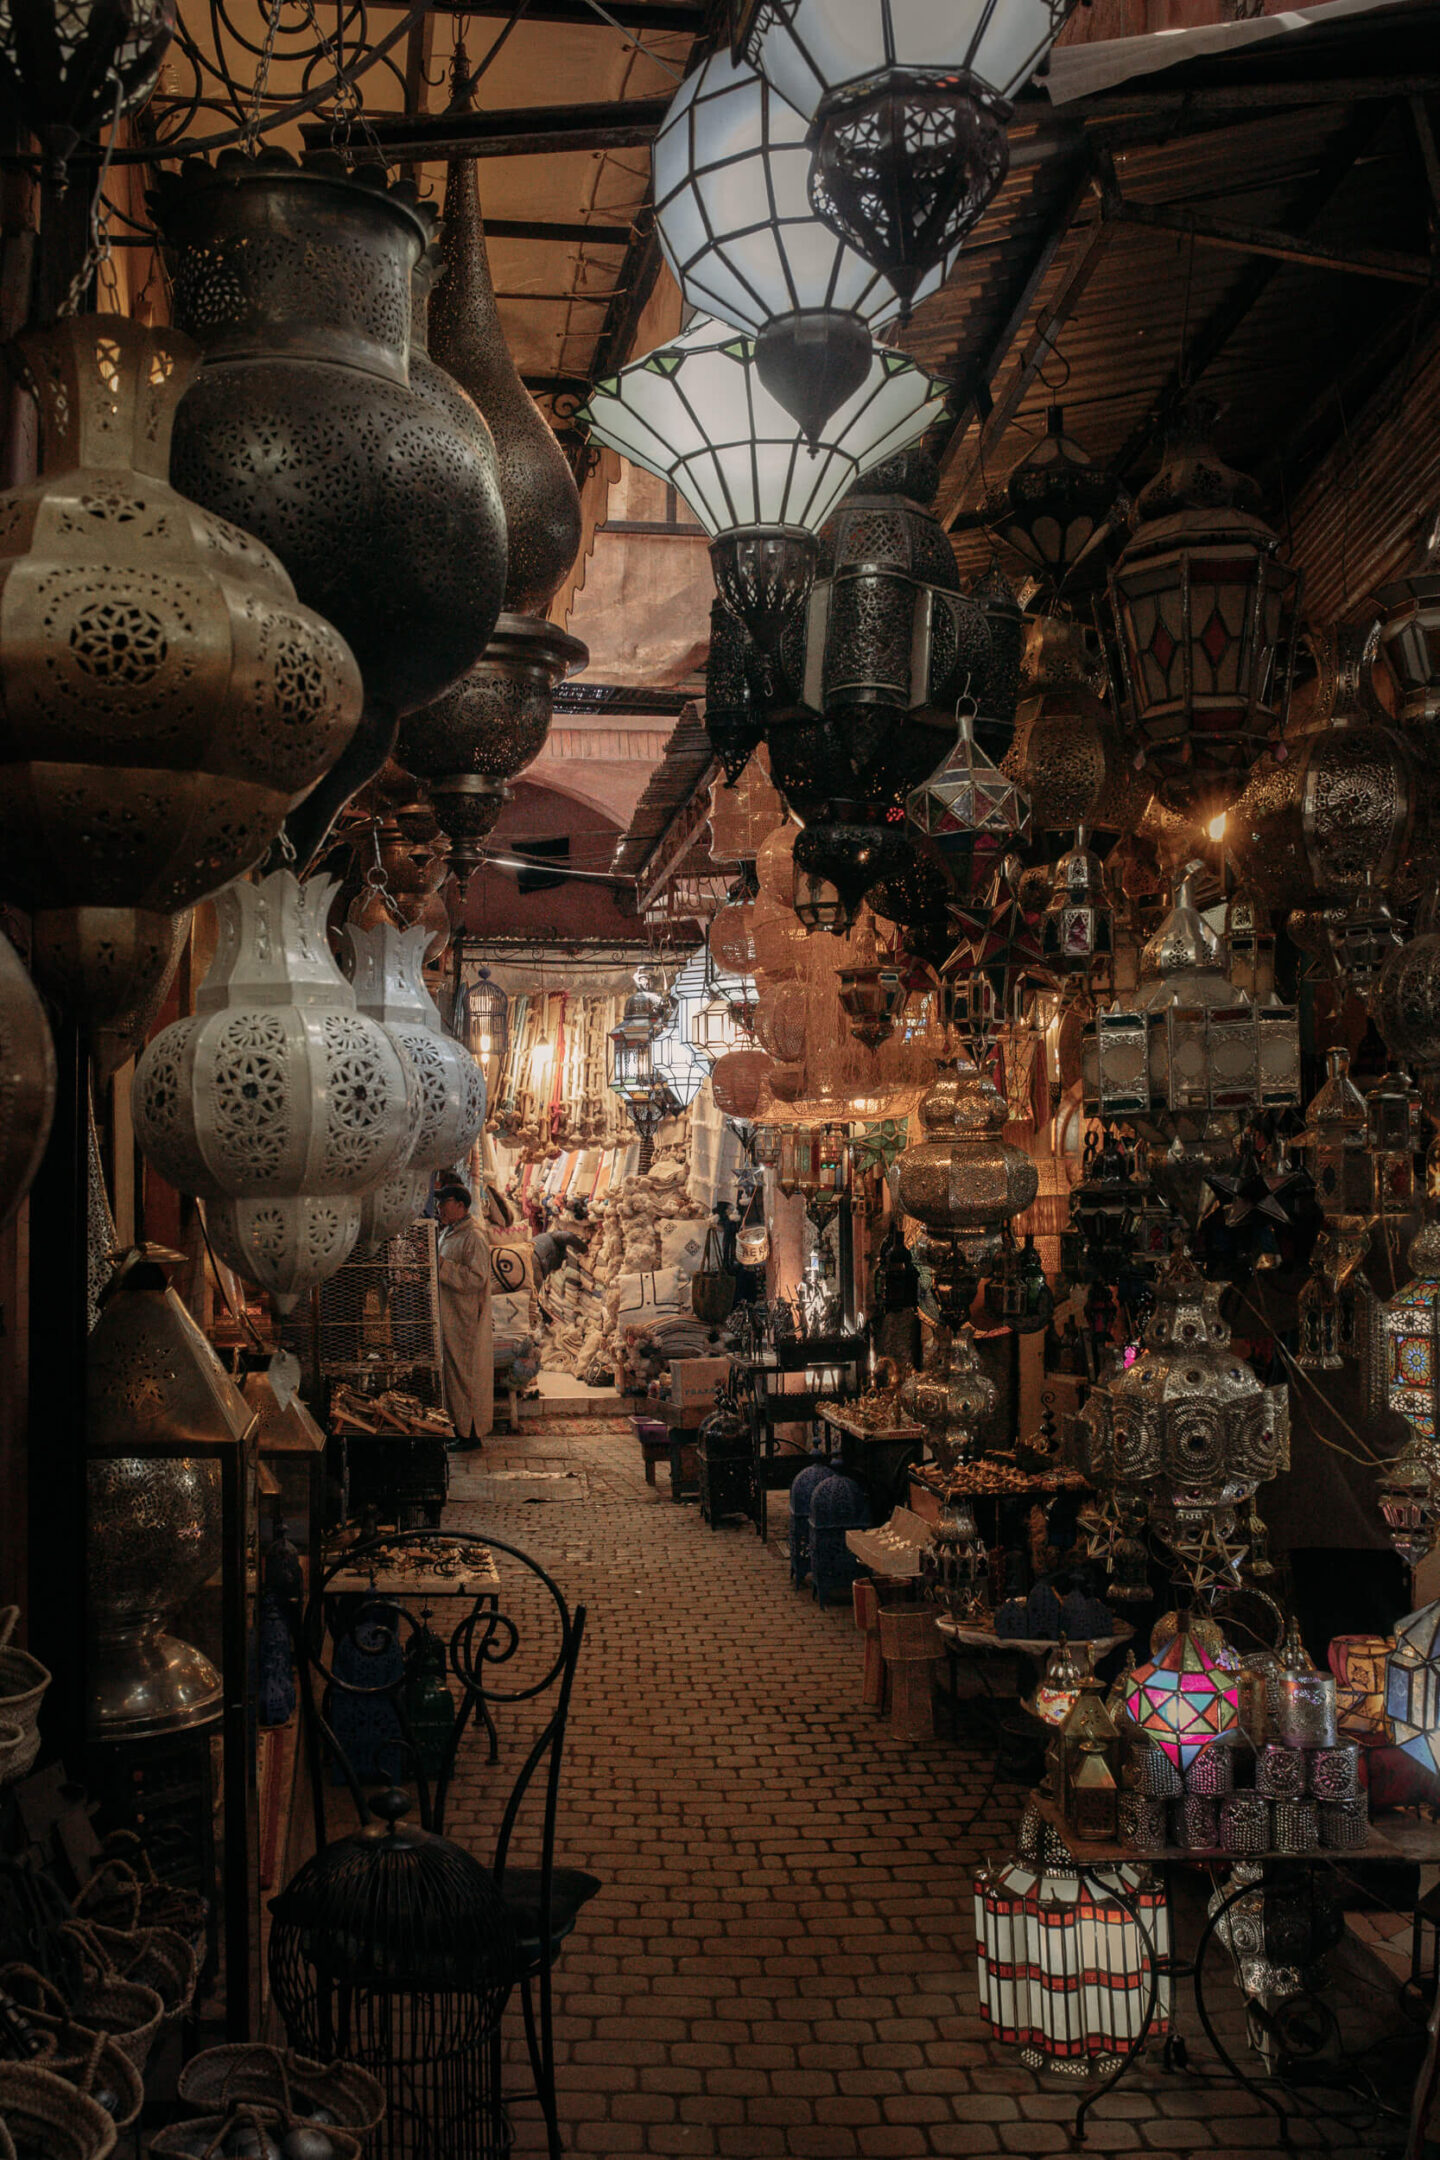 Souk with lanterns and lamps in the medina, Marrakech 